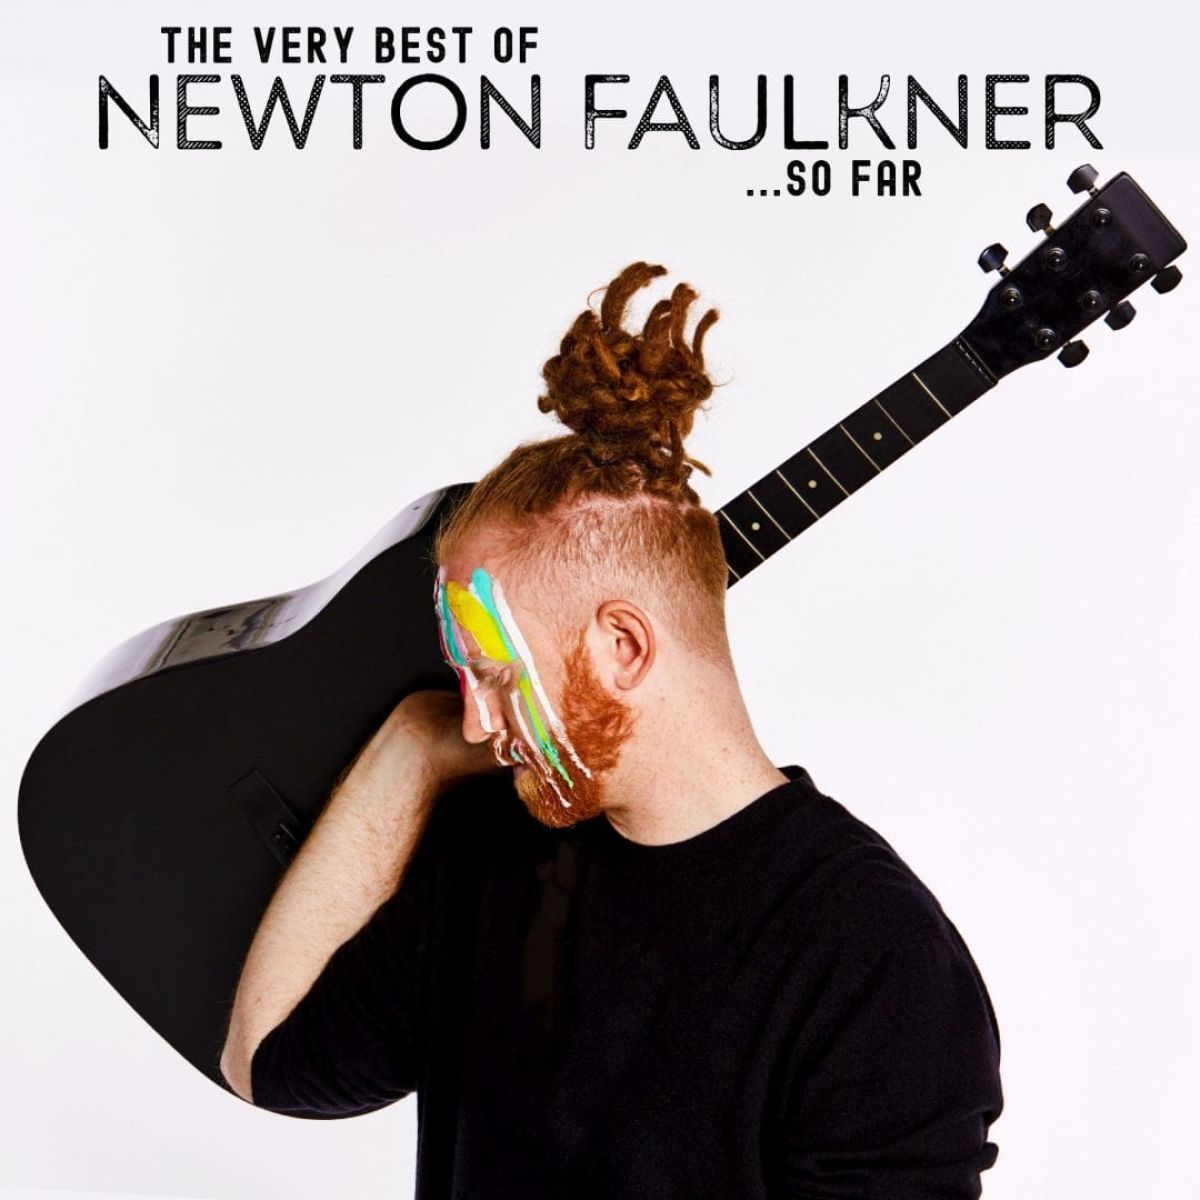 In Conversation with Newton Faulkner